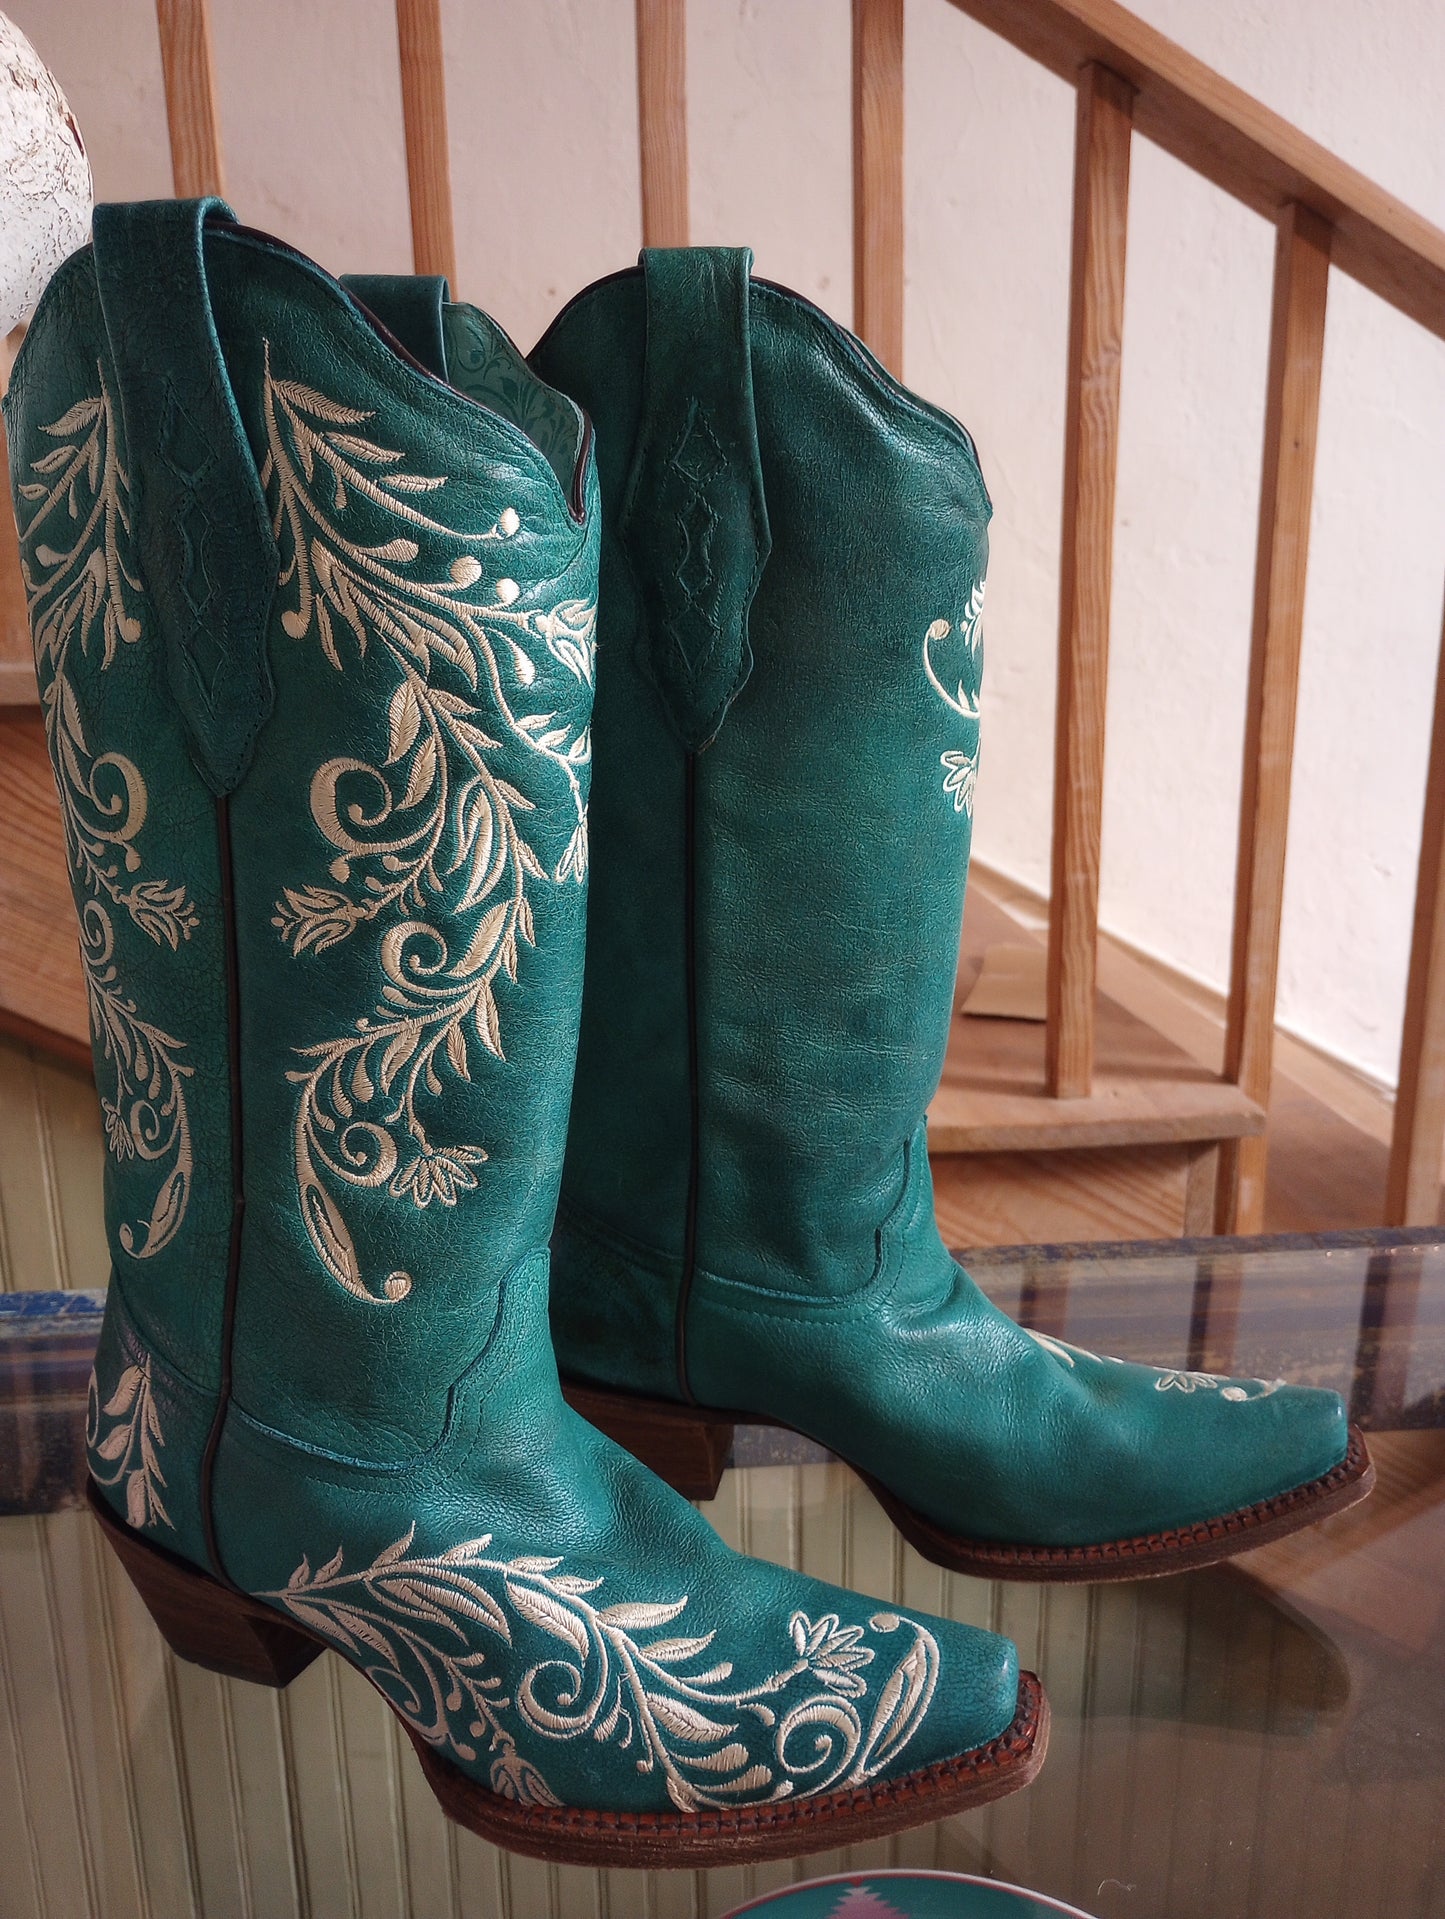 New Corral Woman's Boot Size 7